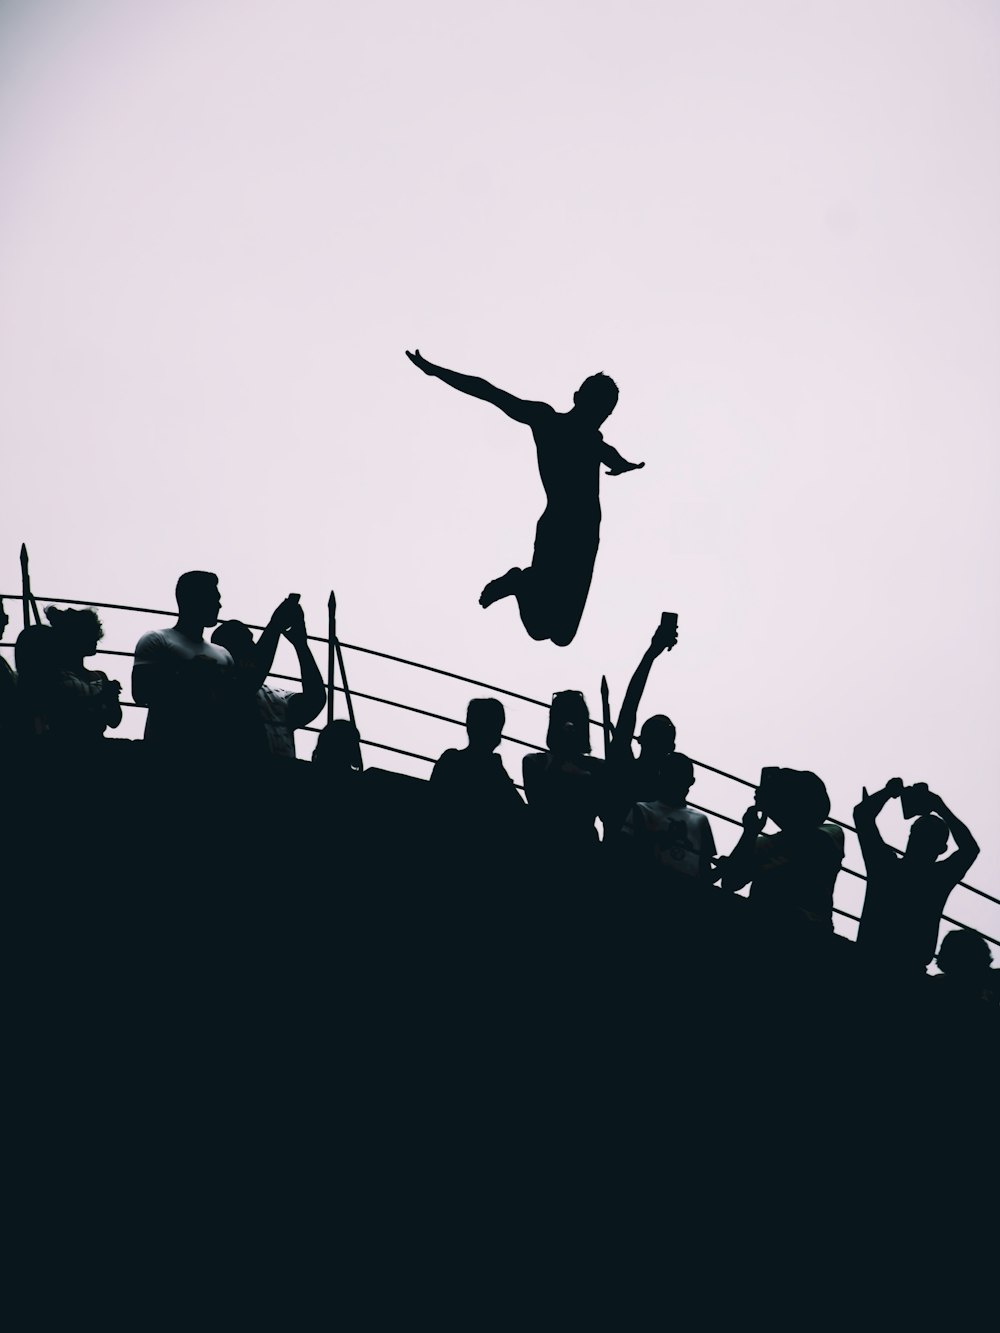 silhouette of people jumping during daytime